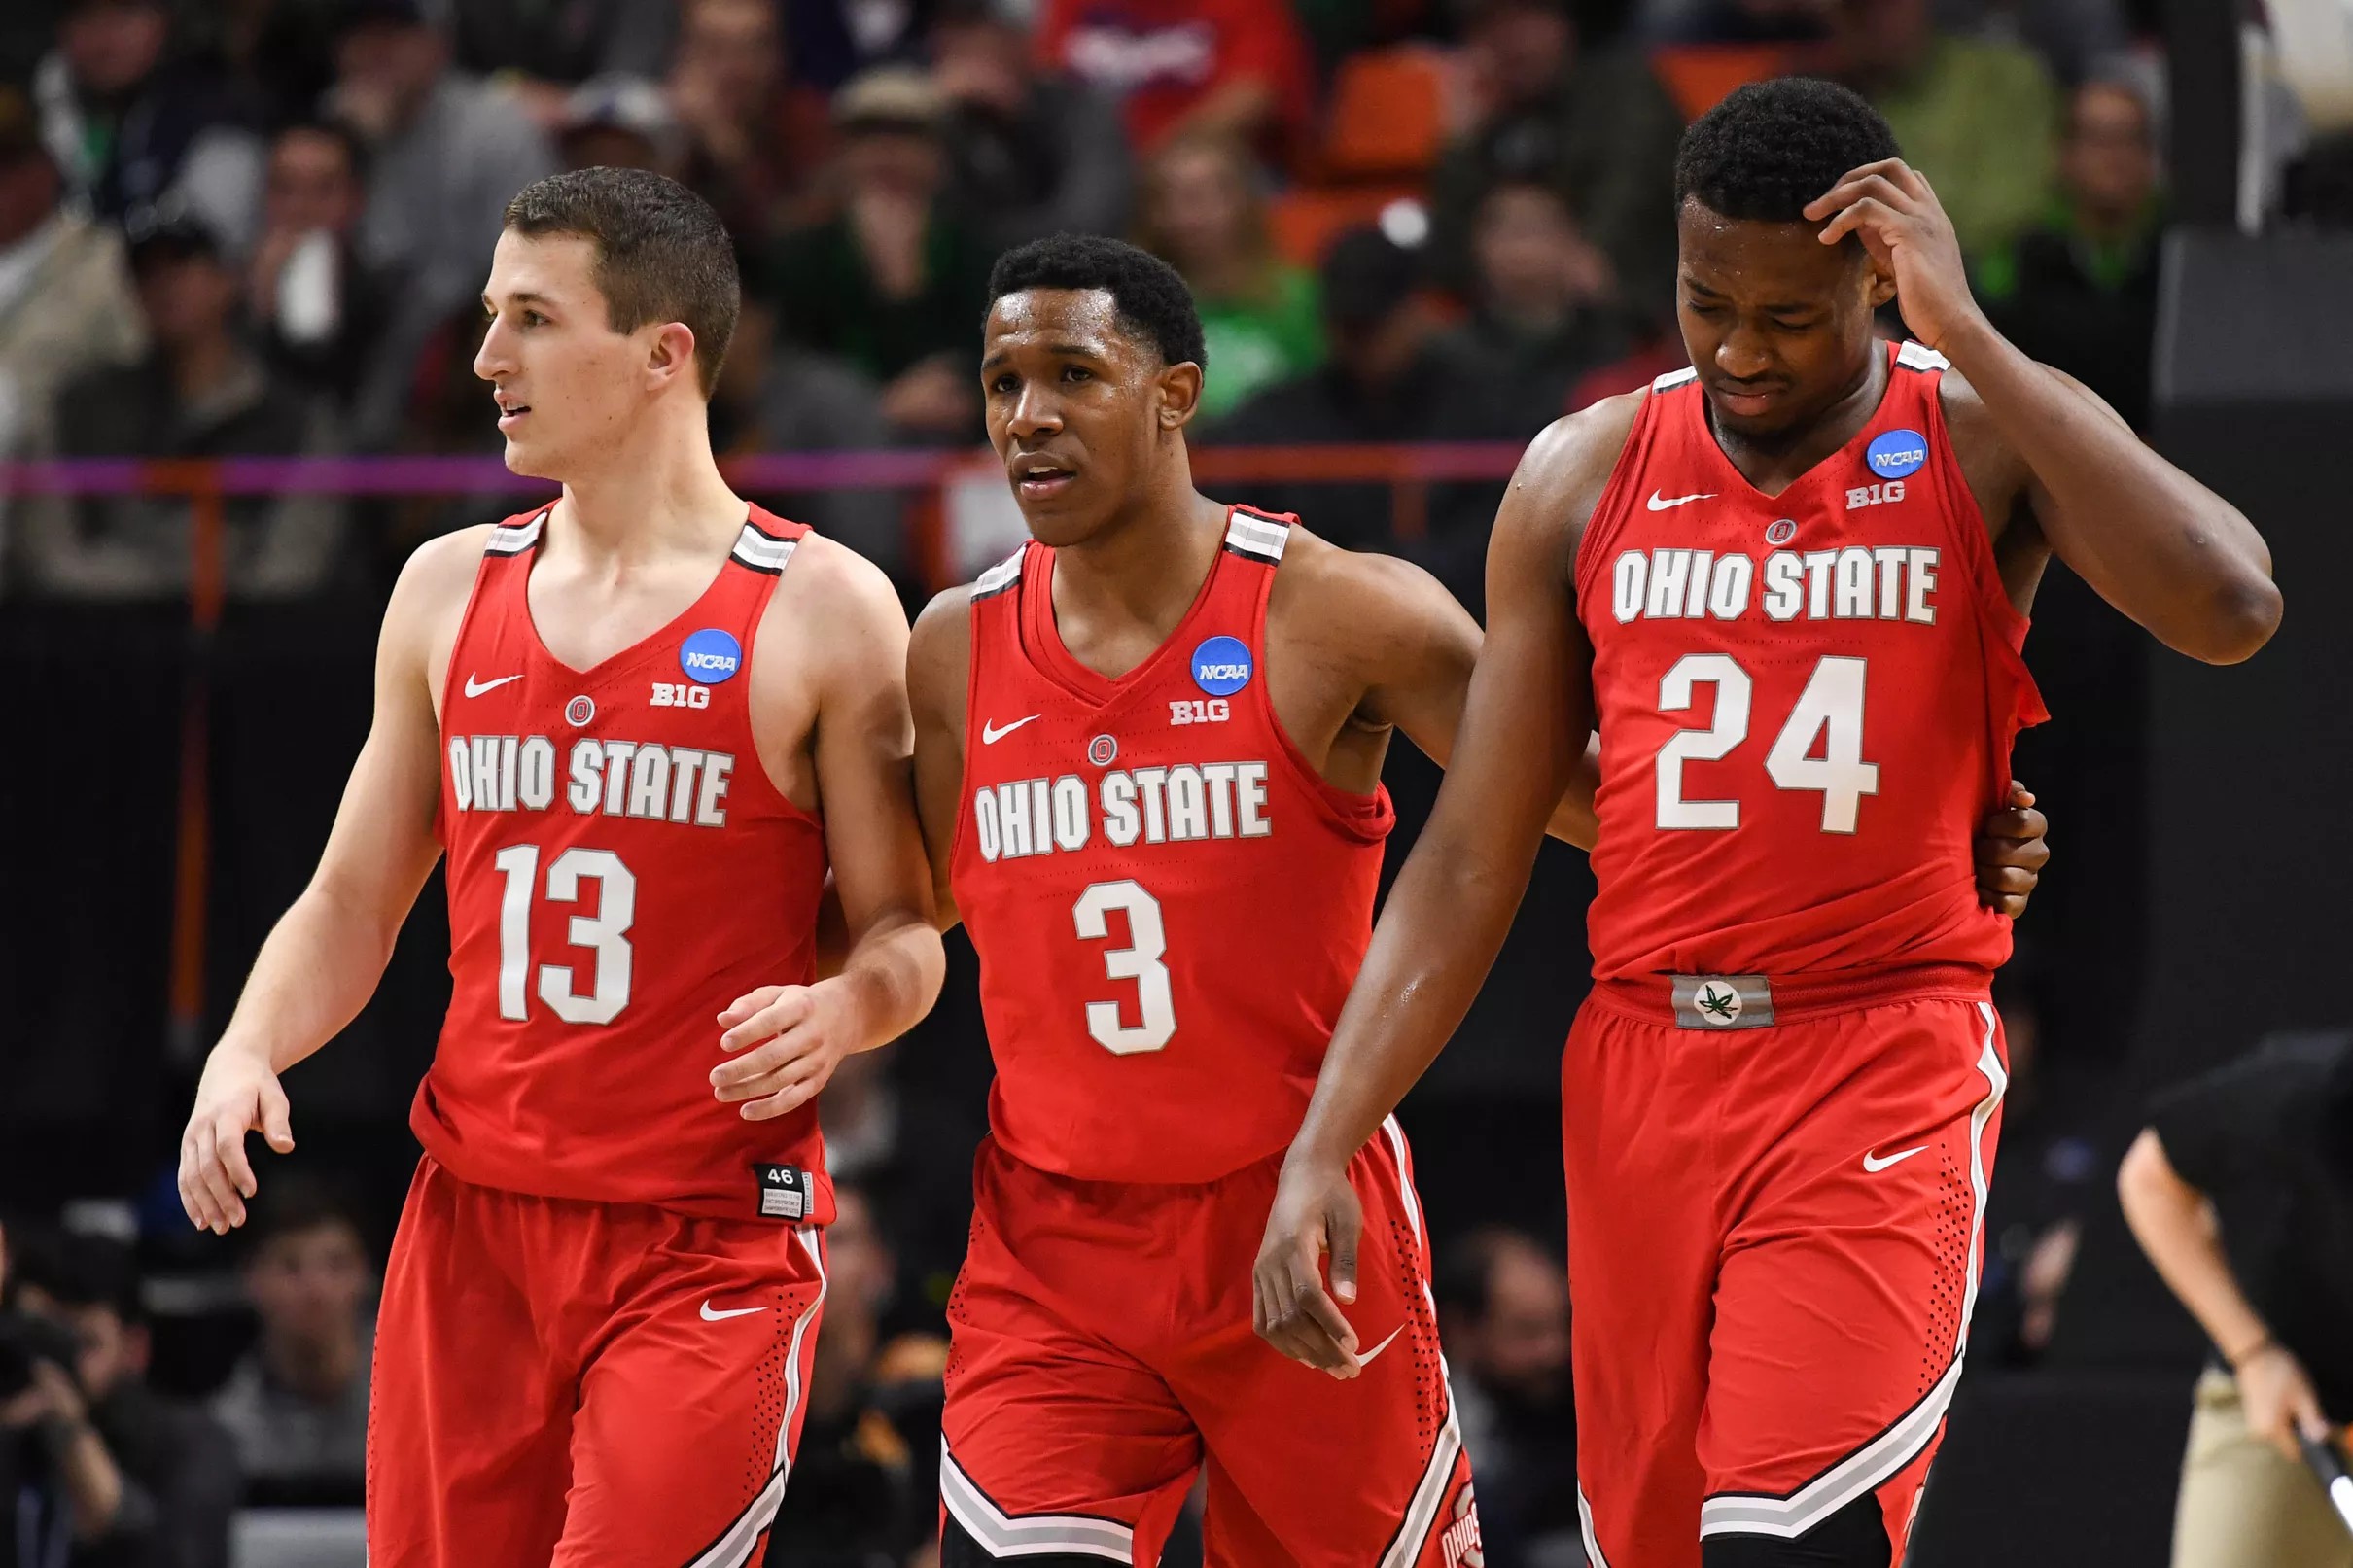 Ohio State basketball adds Bucknell to 2018-19 non-conference schedule